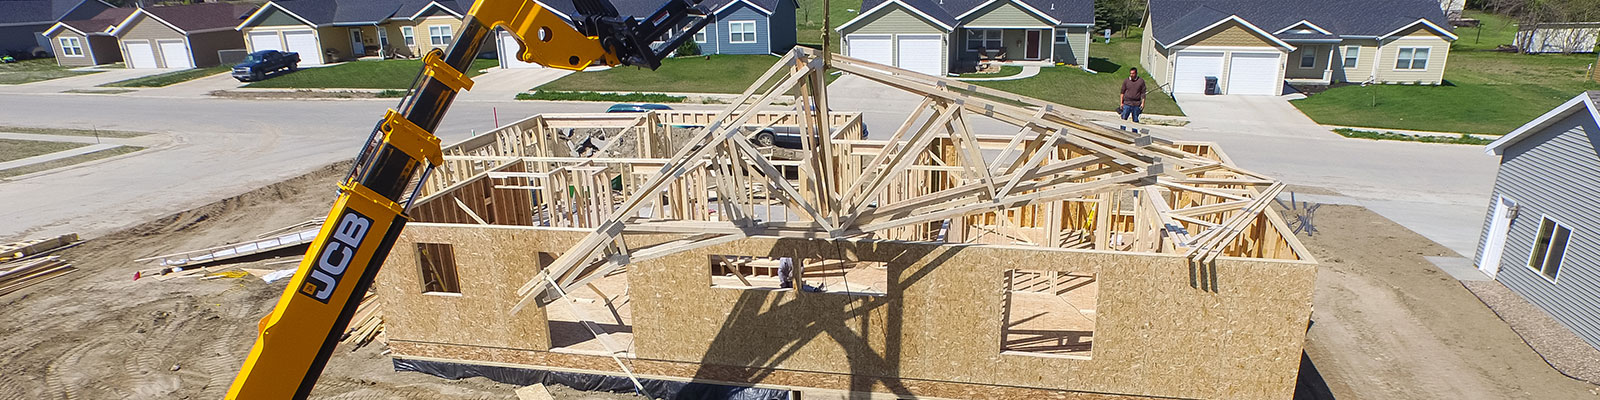 Construction on a single family home. Courtesy McKenzie County Tourism 